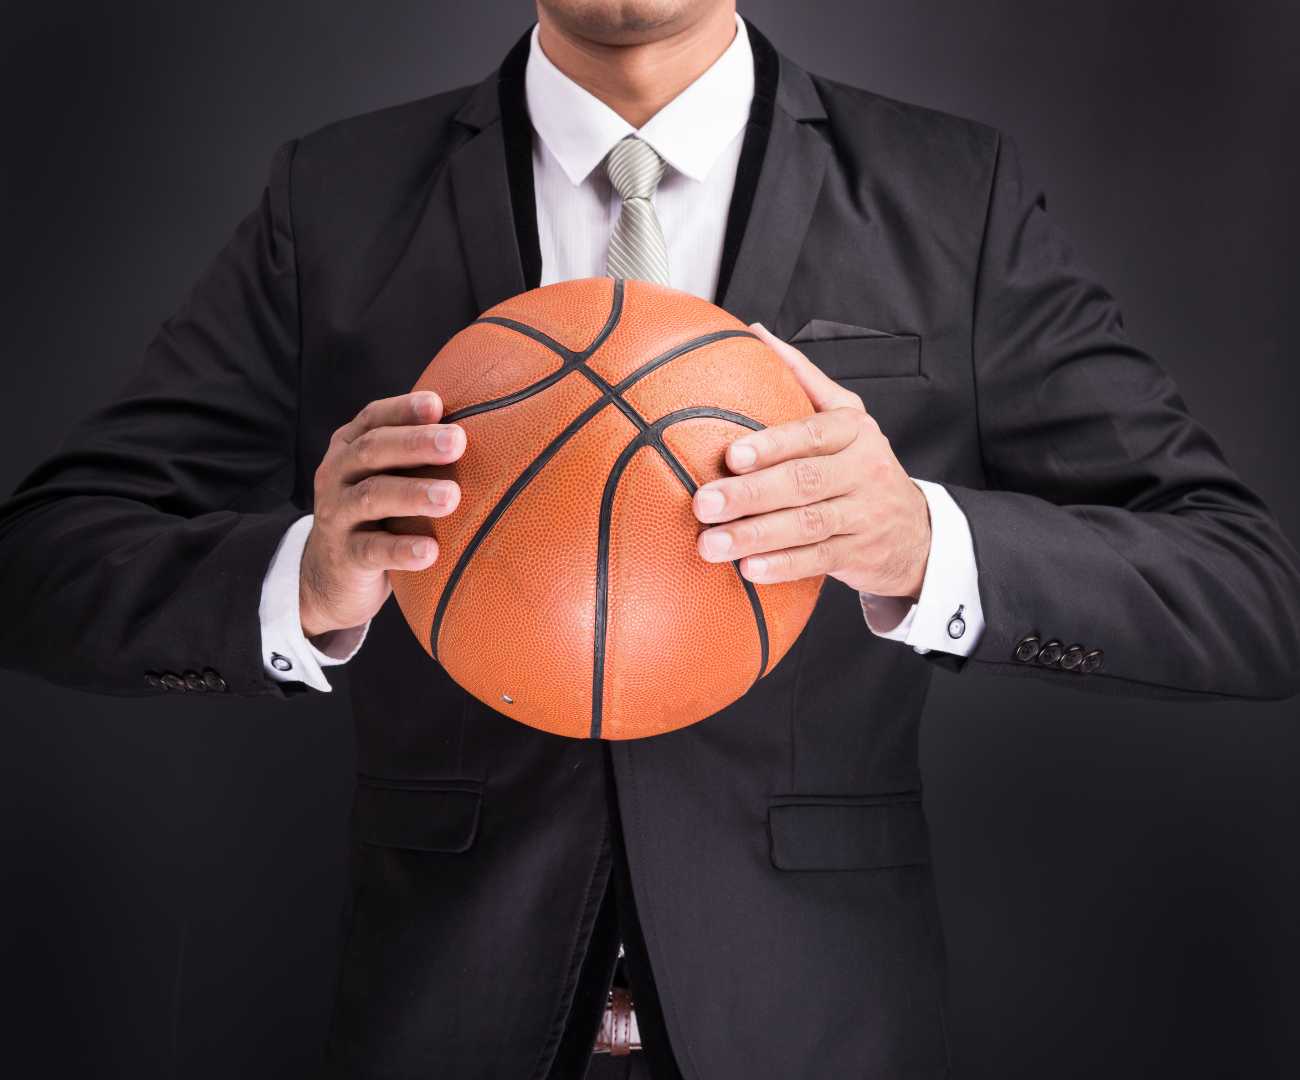 man holding a basketball and wearing a black business suit